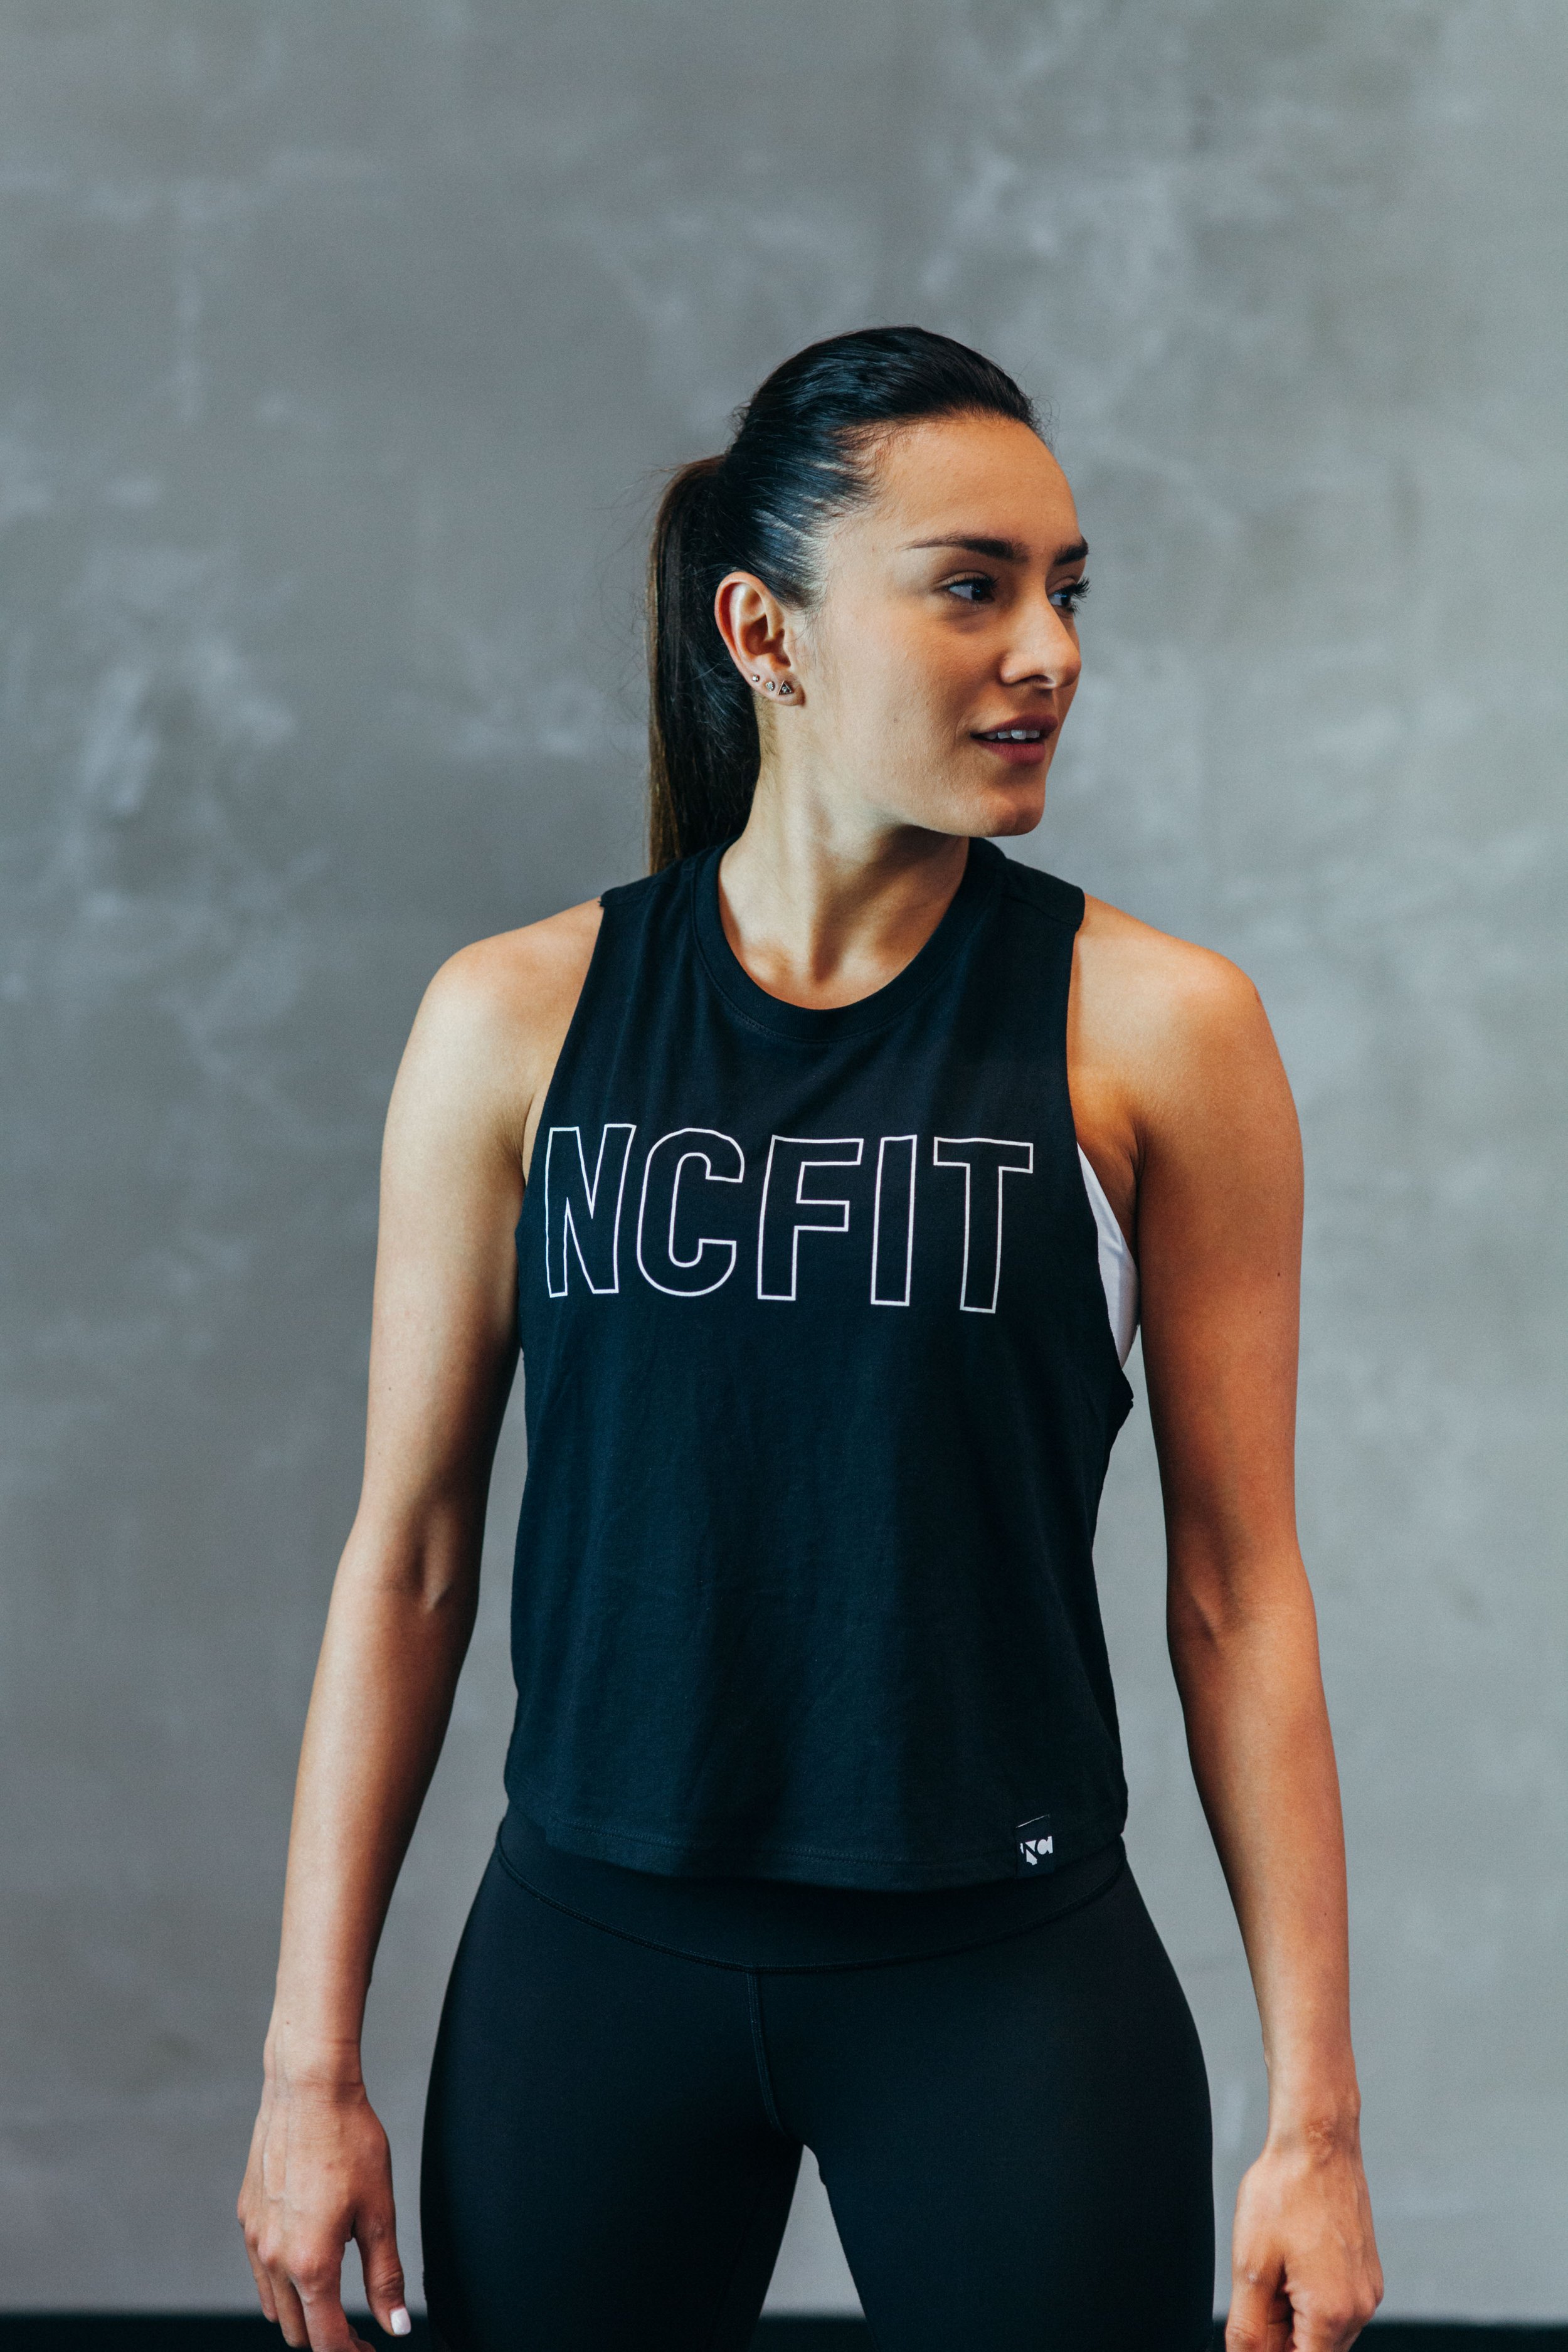 New to NCFIT | NCFIT Omaha